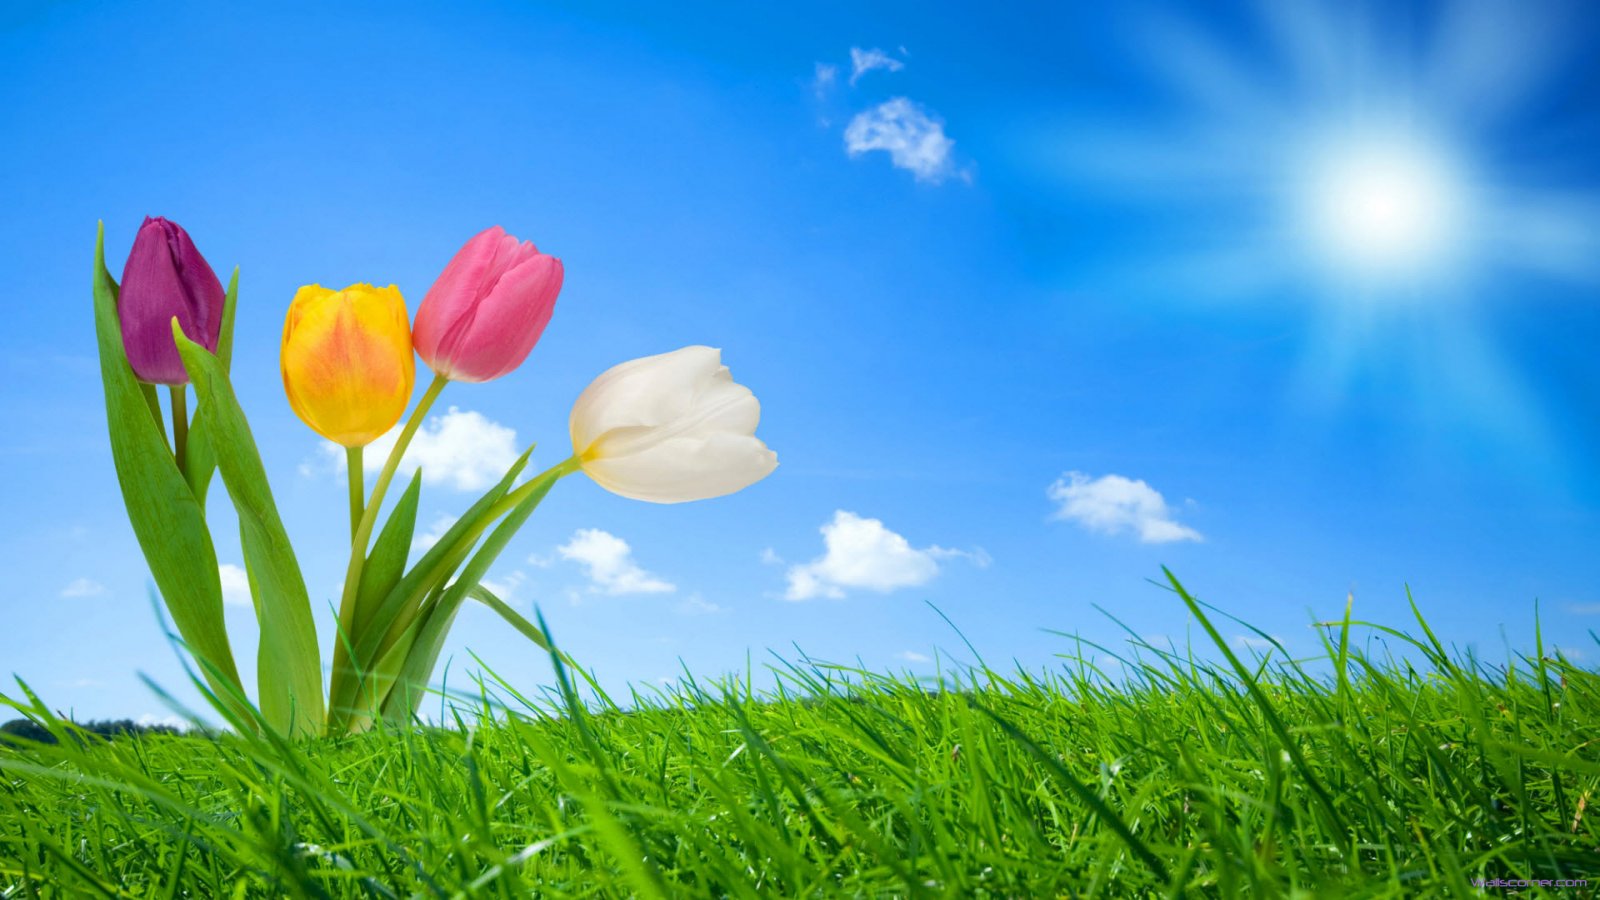 of spring nature beauty spring nature hd wallpaper wallpaper